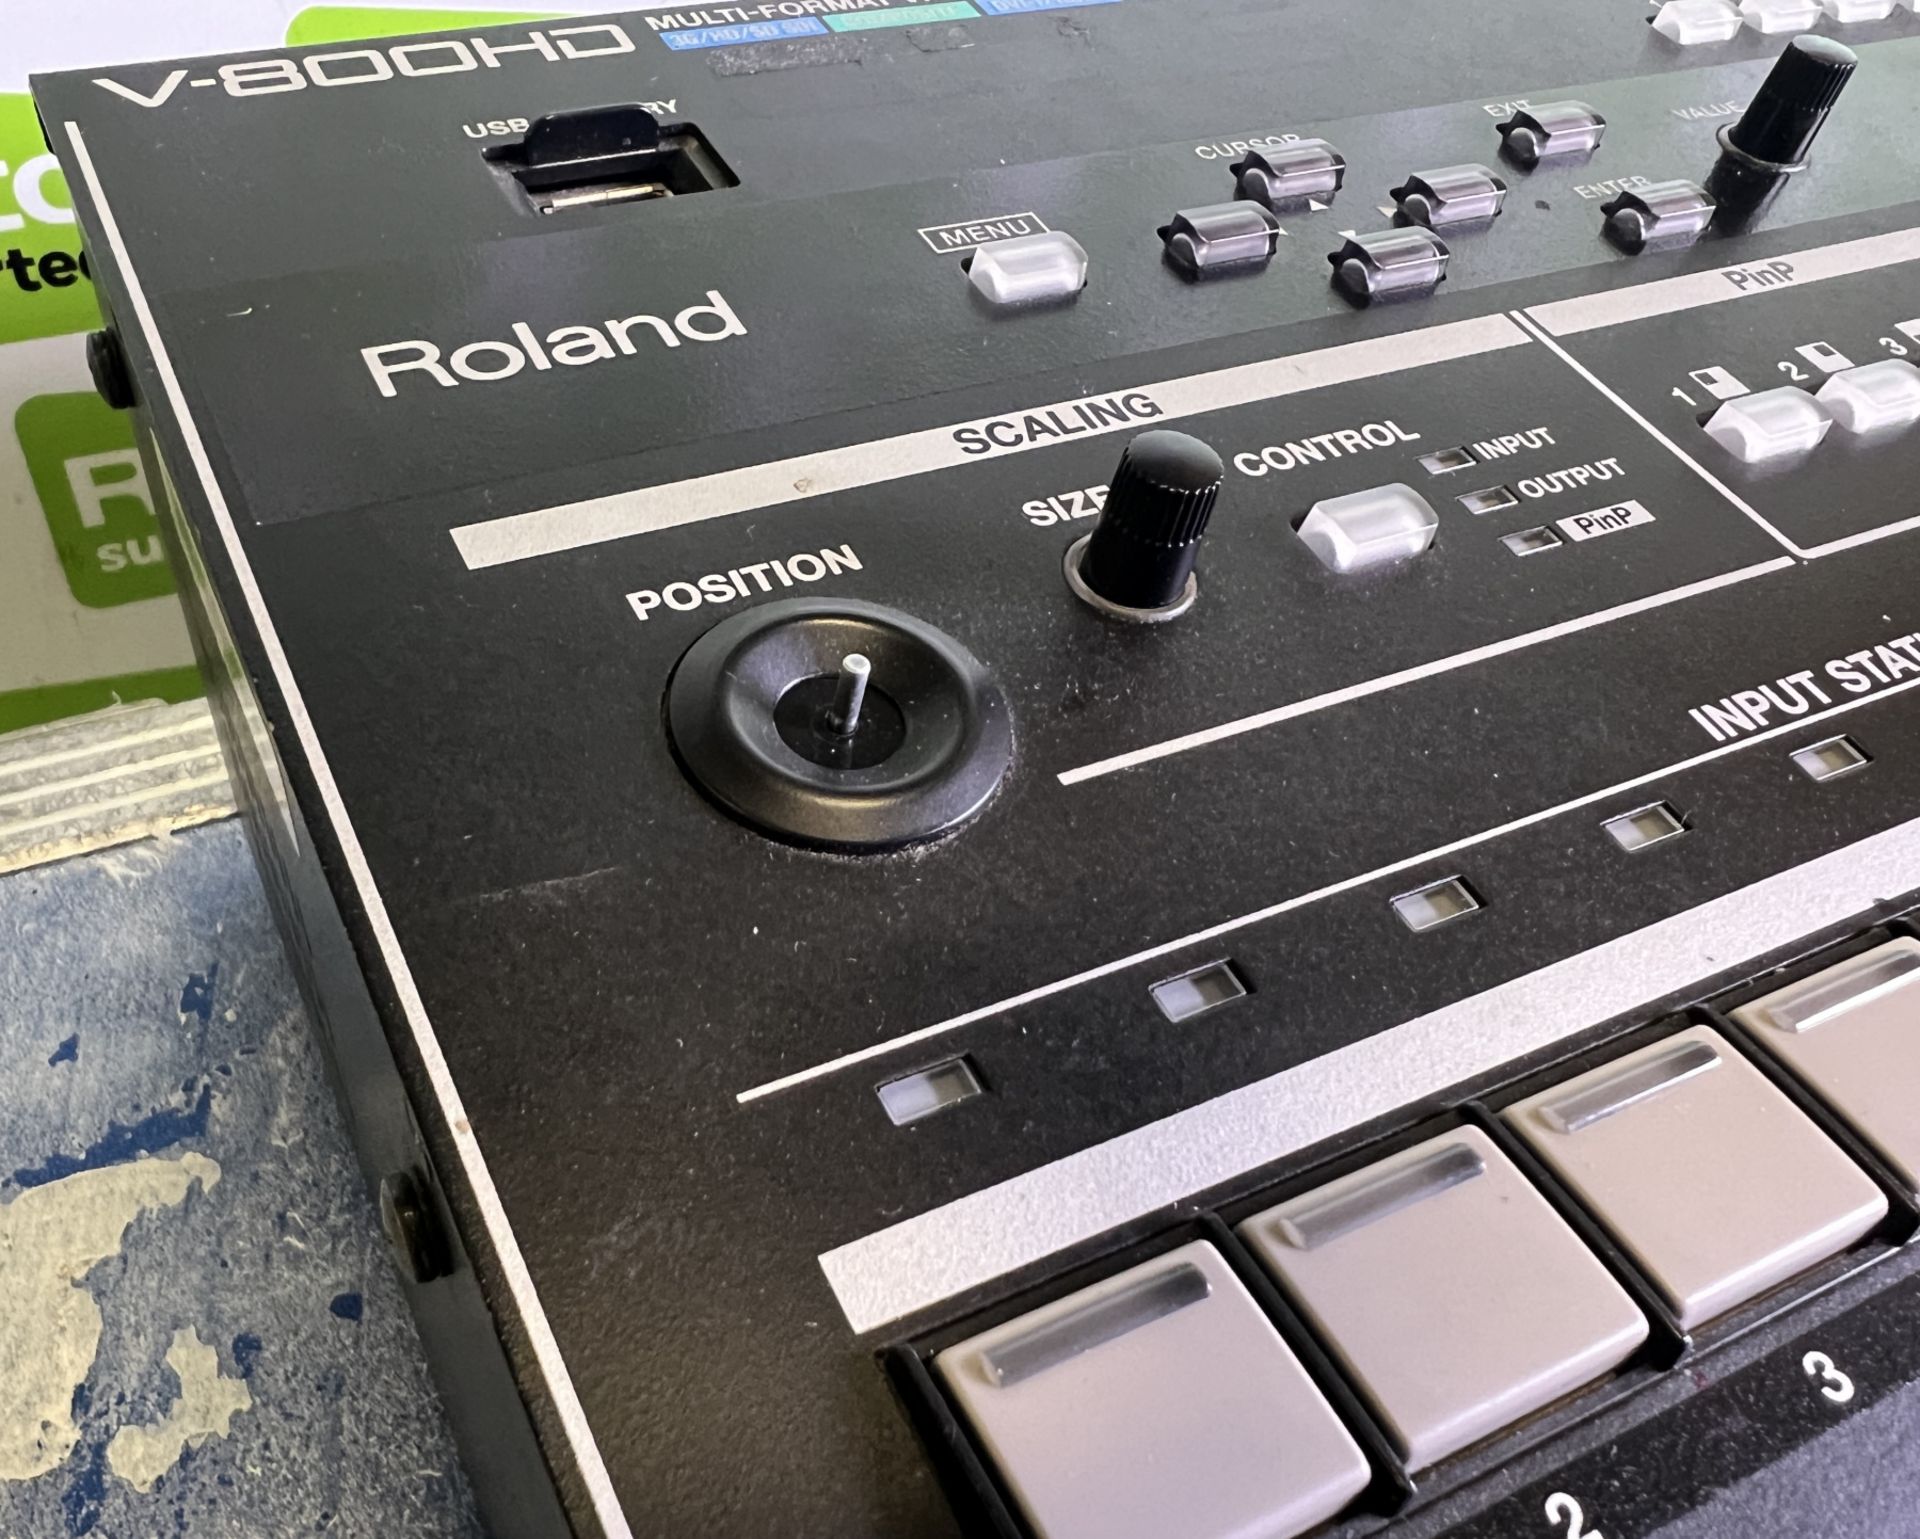 Roland V800HD vision mixer in flight case - case dimensions: L 690 x W 370 x H 230mm - FAULTY OUTPUT - Image 4 of 10